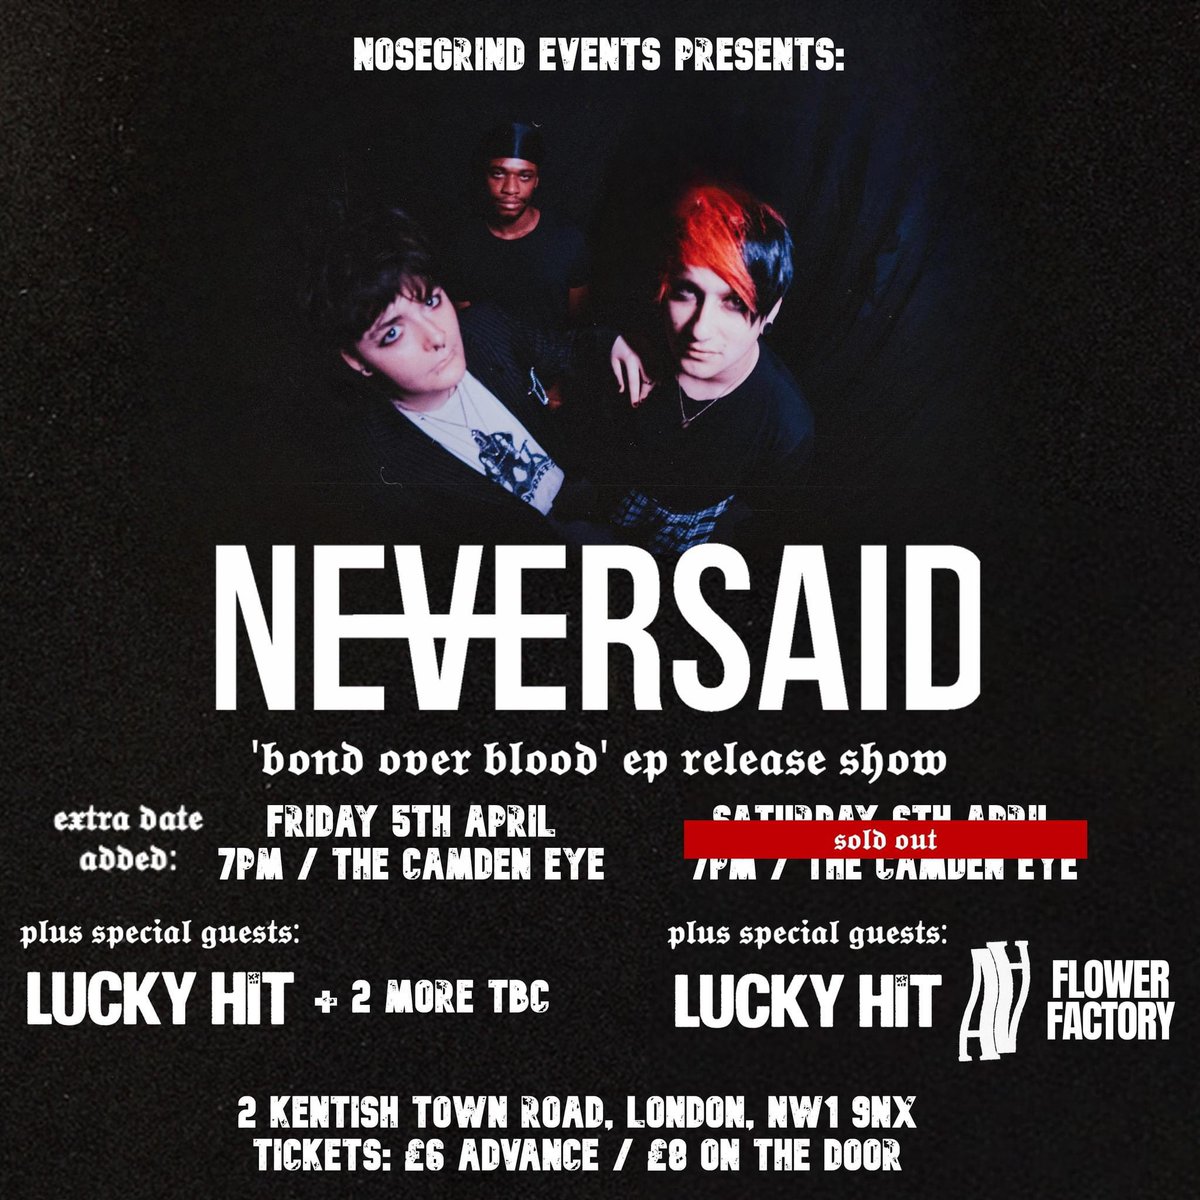 So stoked to announce that we will be main support for our pals in @NEVERSAIDBAND’s EP release shows at the The Camden Eye. This is now a 2 night event! Tickets are available for Friday but already SOLD OUT on Saturday. Grab them asap if you want in🤘🏻 tinyurl.com/47k675jf